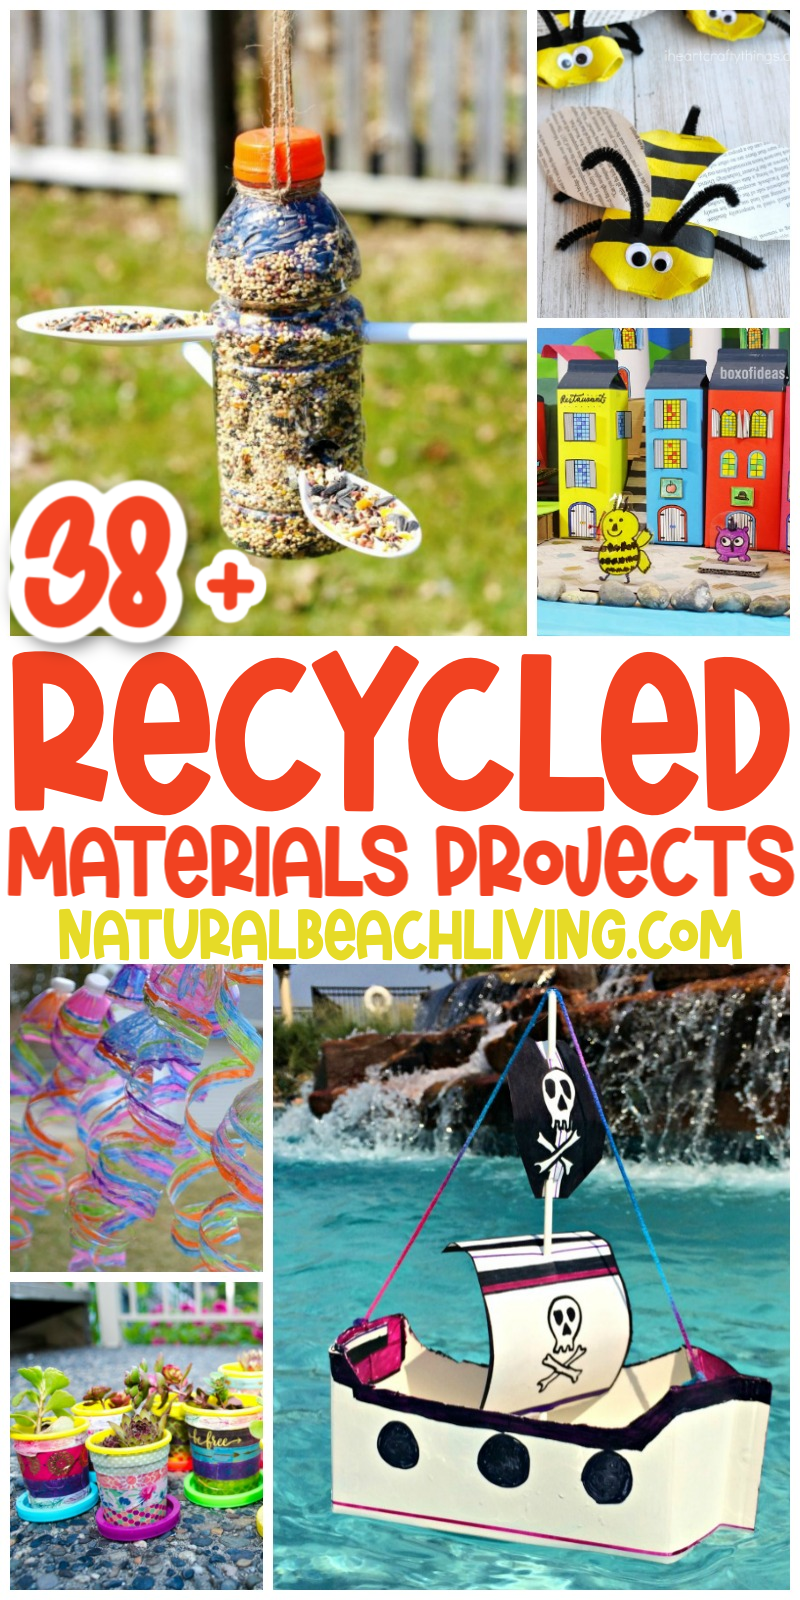 Over 35 Earth Day Activities for Students, Kids of all ages can enjoy these Earth Day activities that inspire children to make a difference. Pollution Activities, Free Earth Day Activities to Celebrate Earth Day, Earth Day Printables, Recyclable Crafts and so much more.  